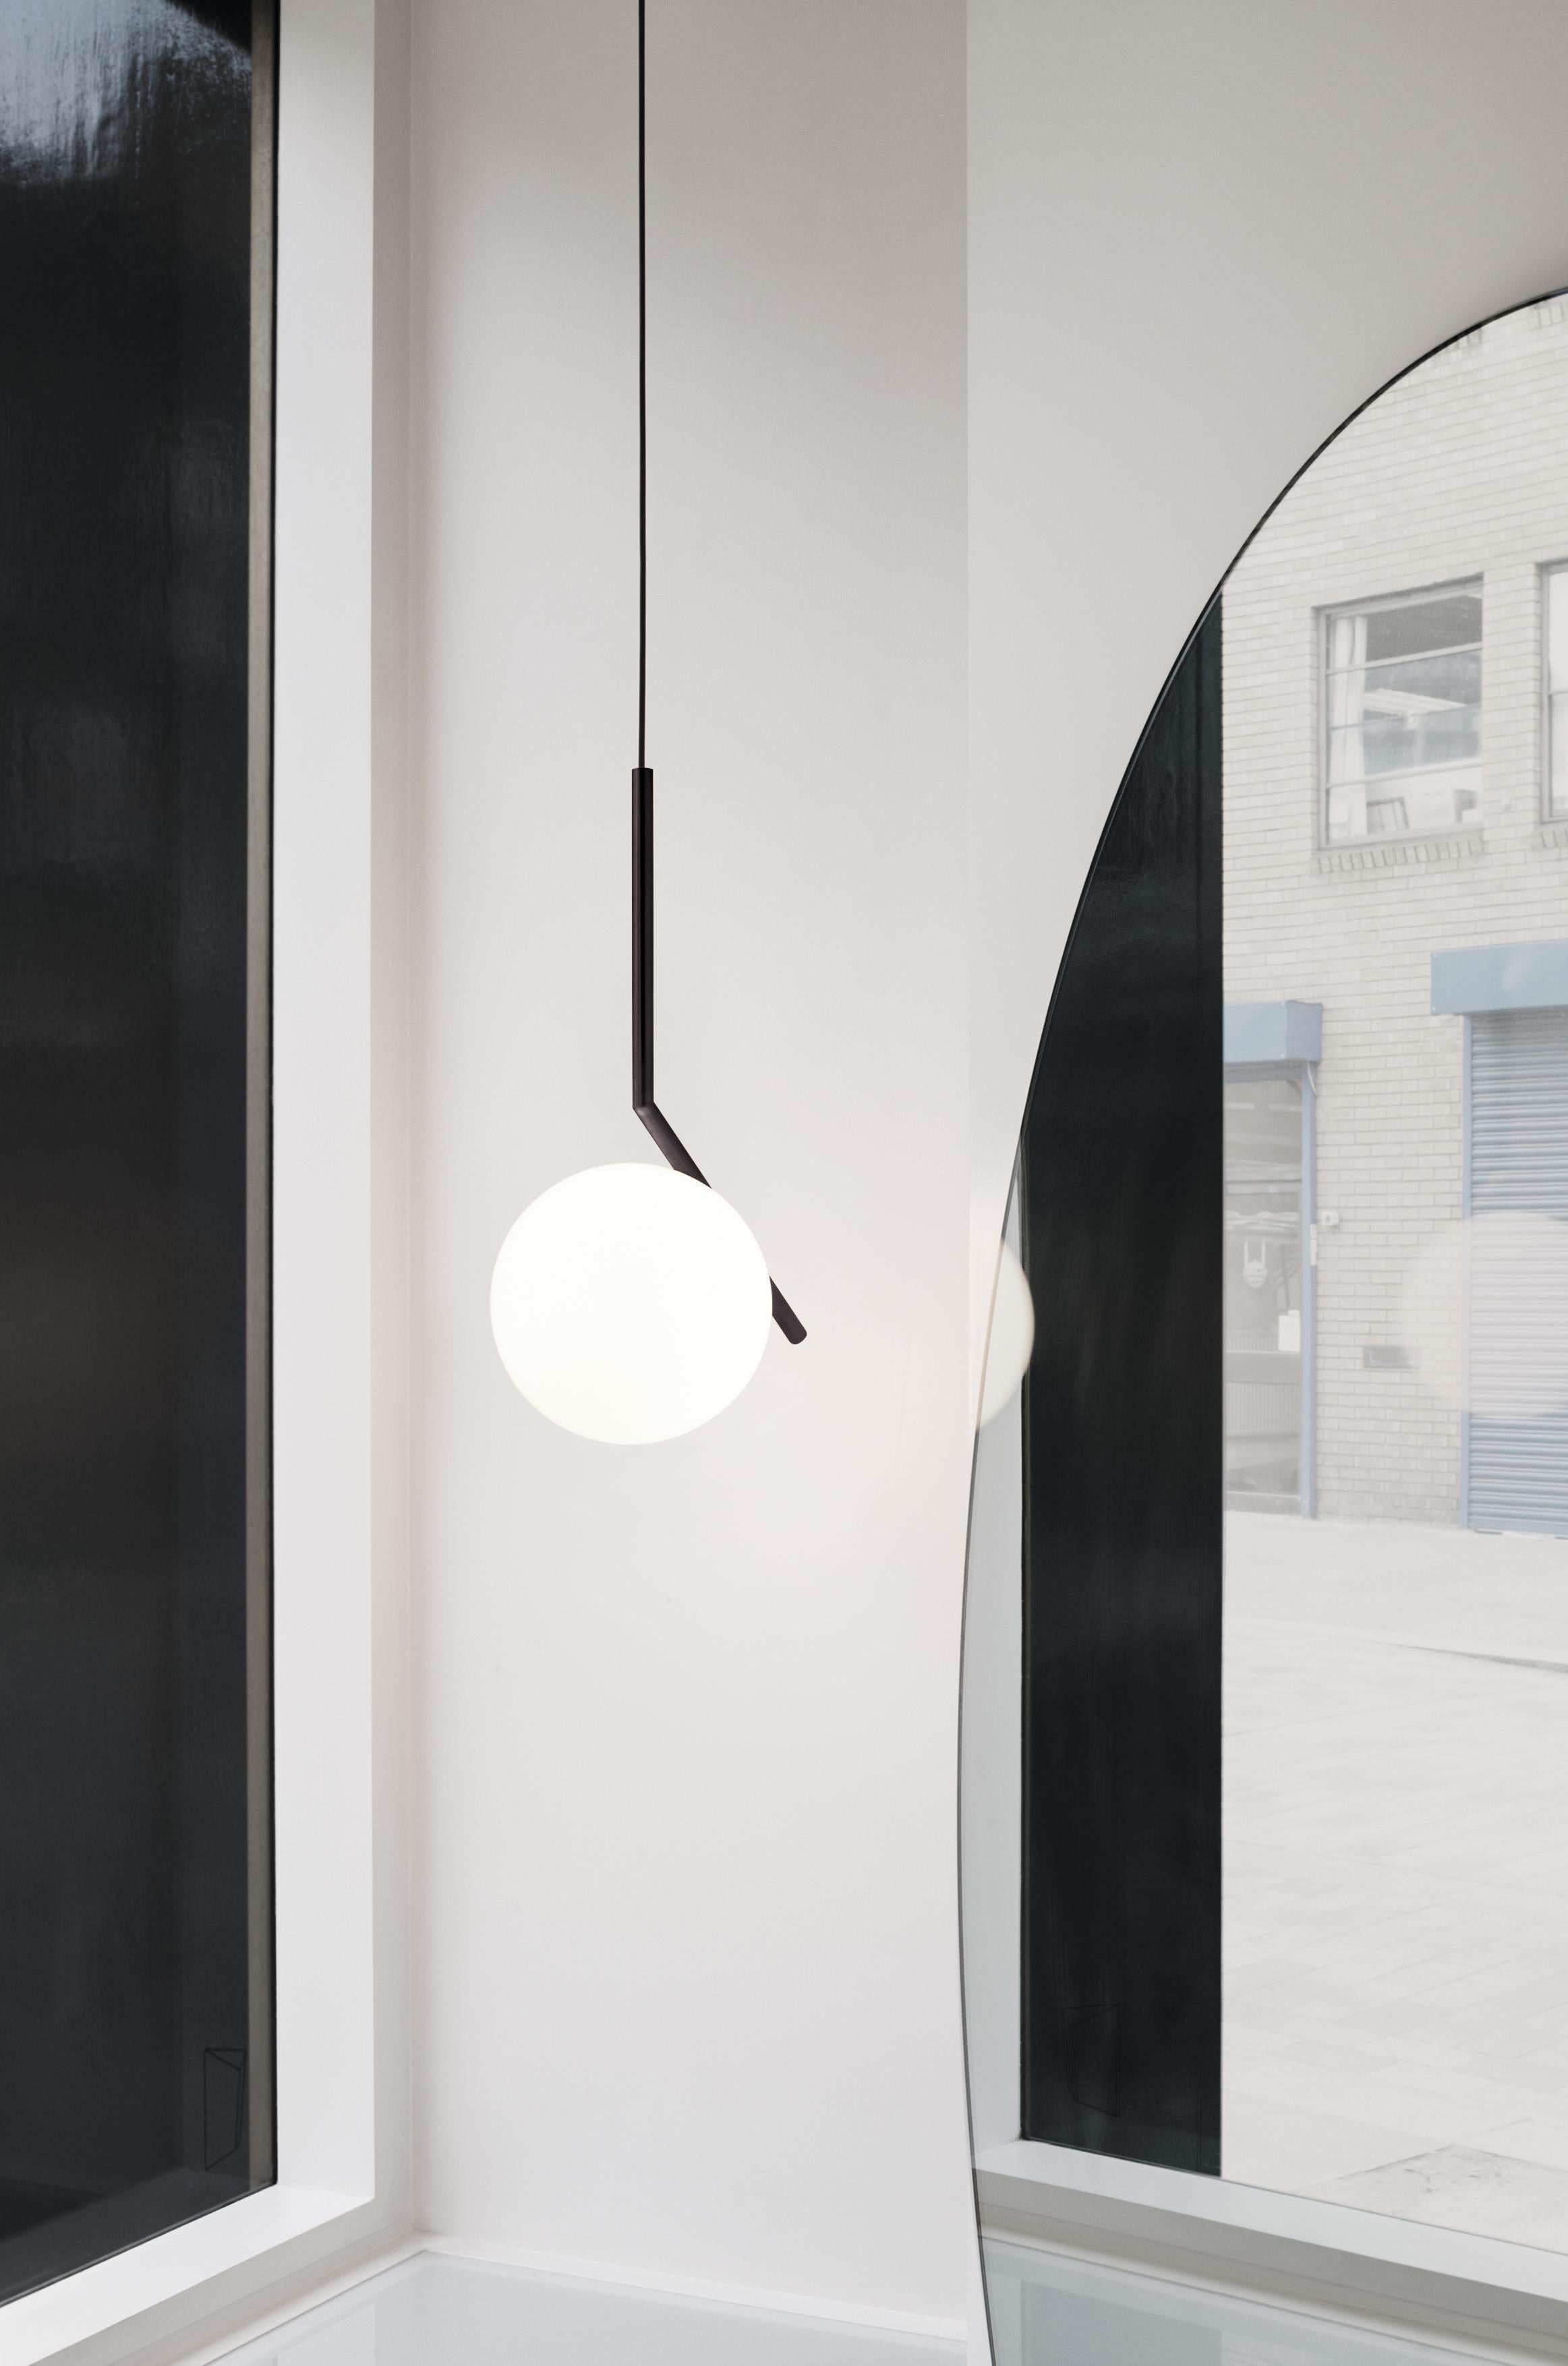 FLOS IC Lights S2 Pendant Light in Black by Michael Anastassiades

Like the other pieces in his IC Light Series, the IC Lights S balances designer Michael Anastassiades’ love of Industrial simplicity with intricate symbolism. Providing diffused